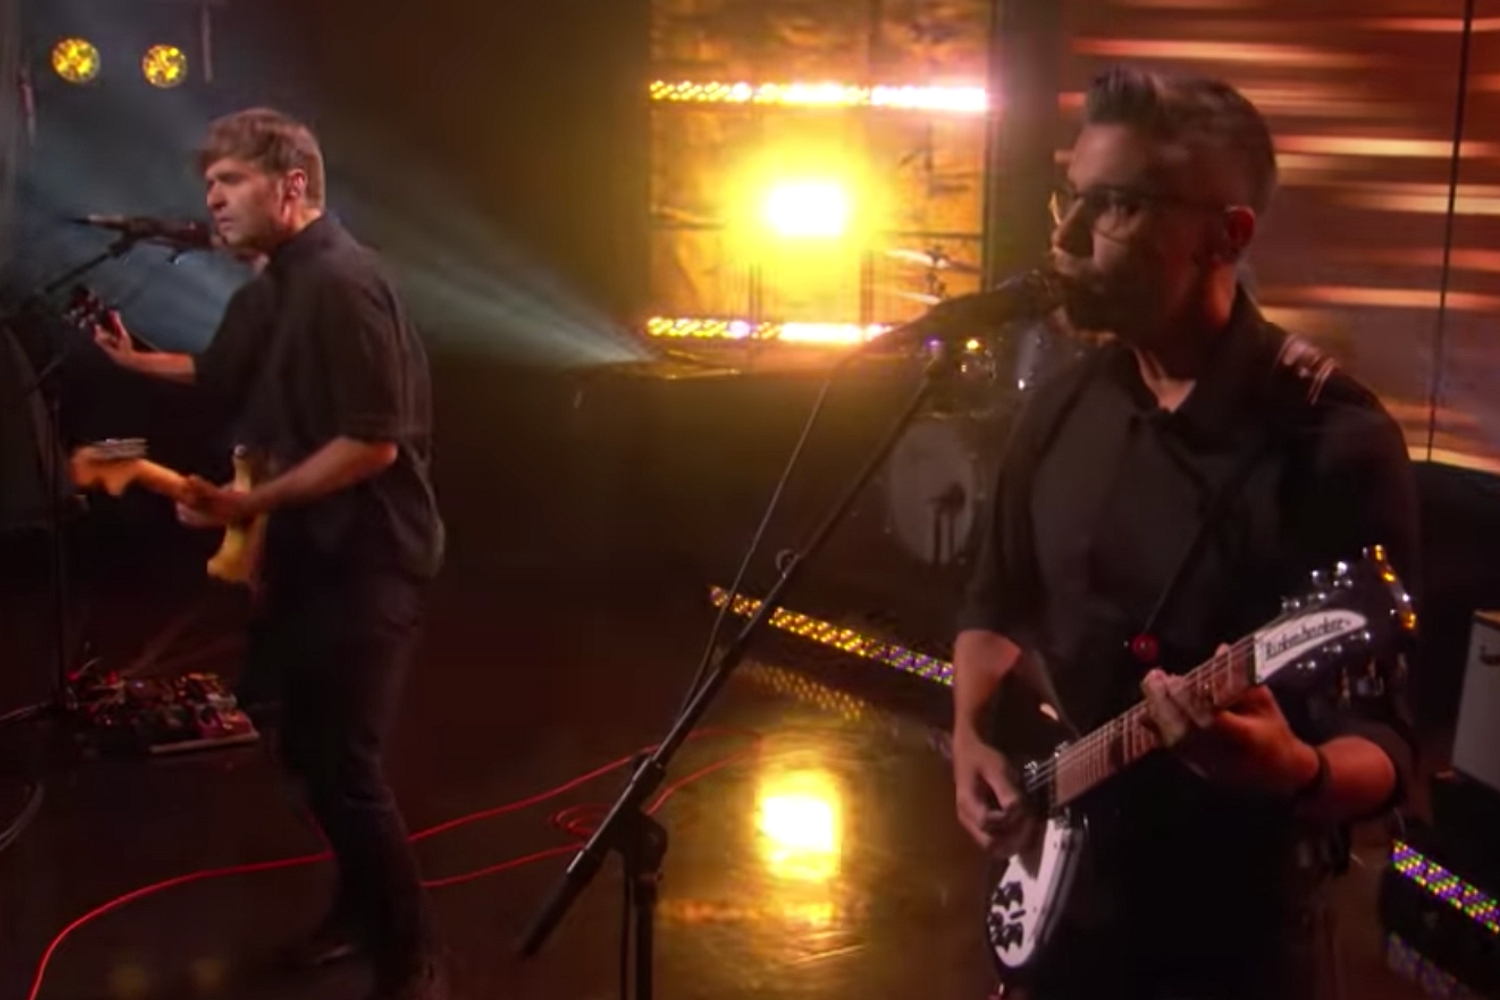 Watch Death Cab For Cutie perform ‘Gold Rush’ on US TV